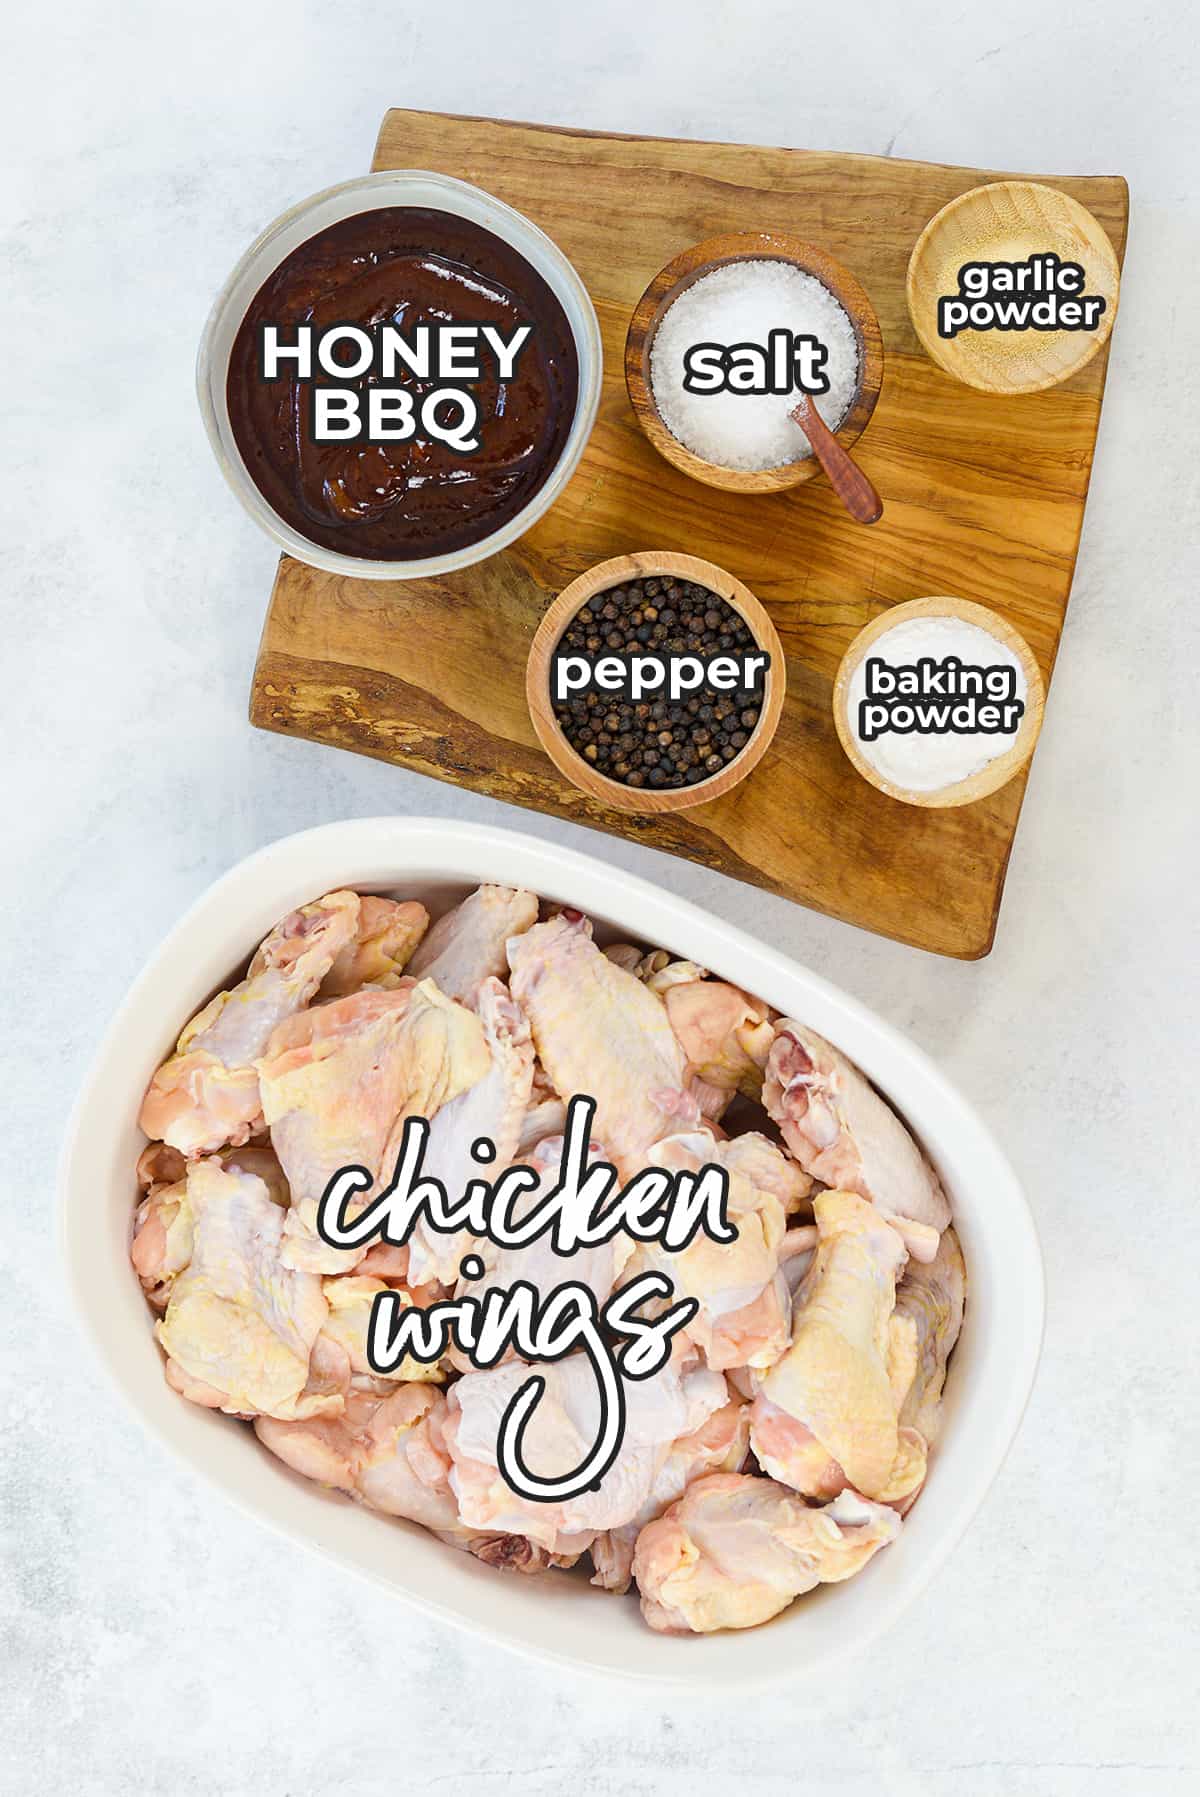 A top down view of all the ingredients used in this recipe including the seasoning, honey BBQ sauce, and raw chicken wings.